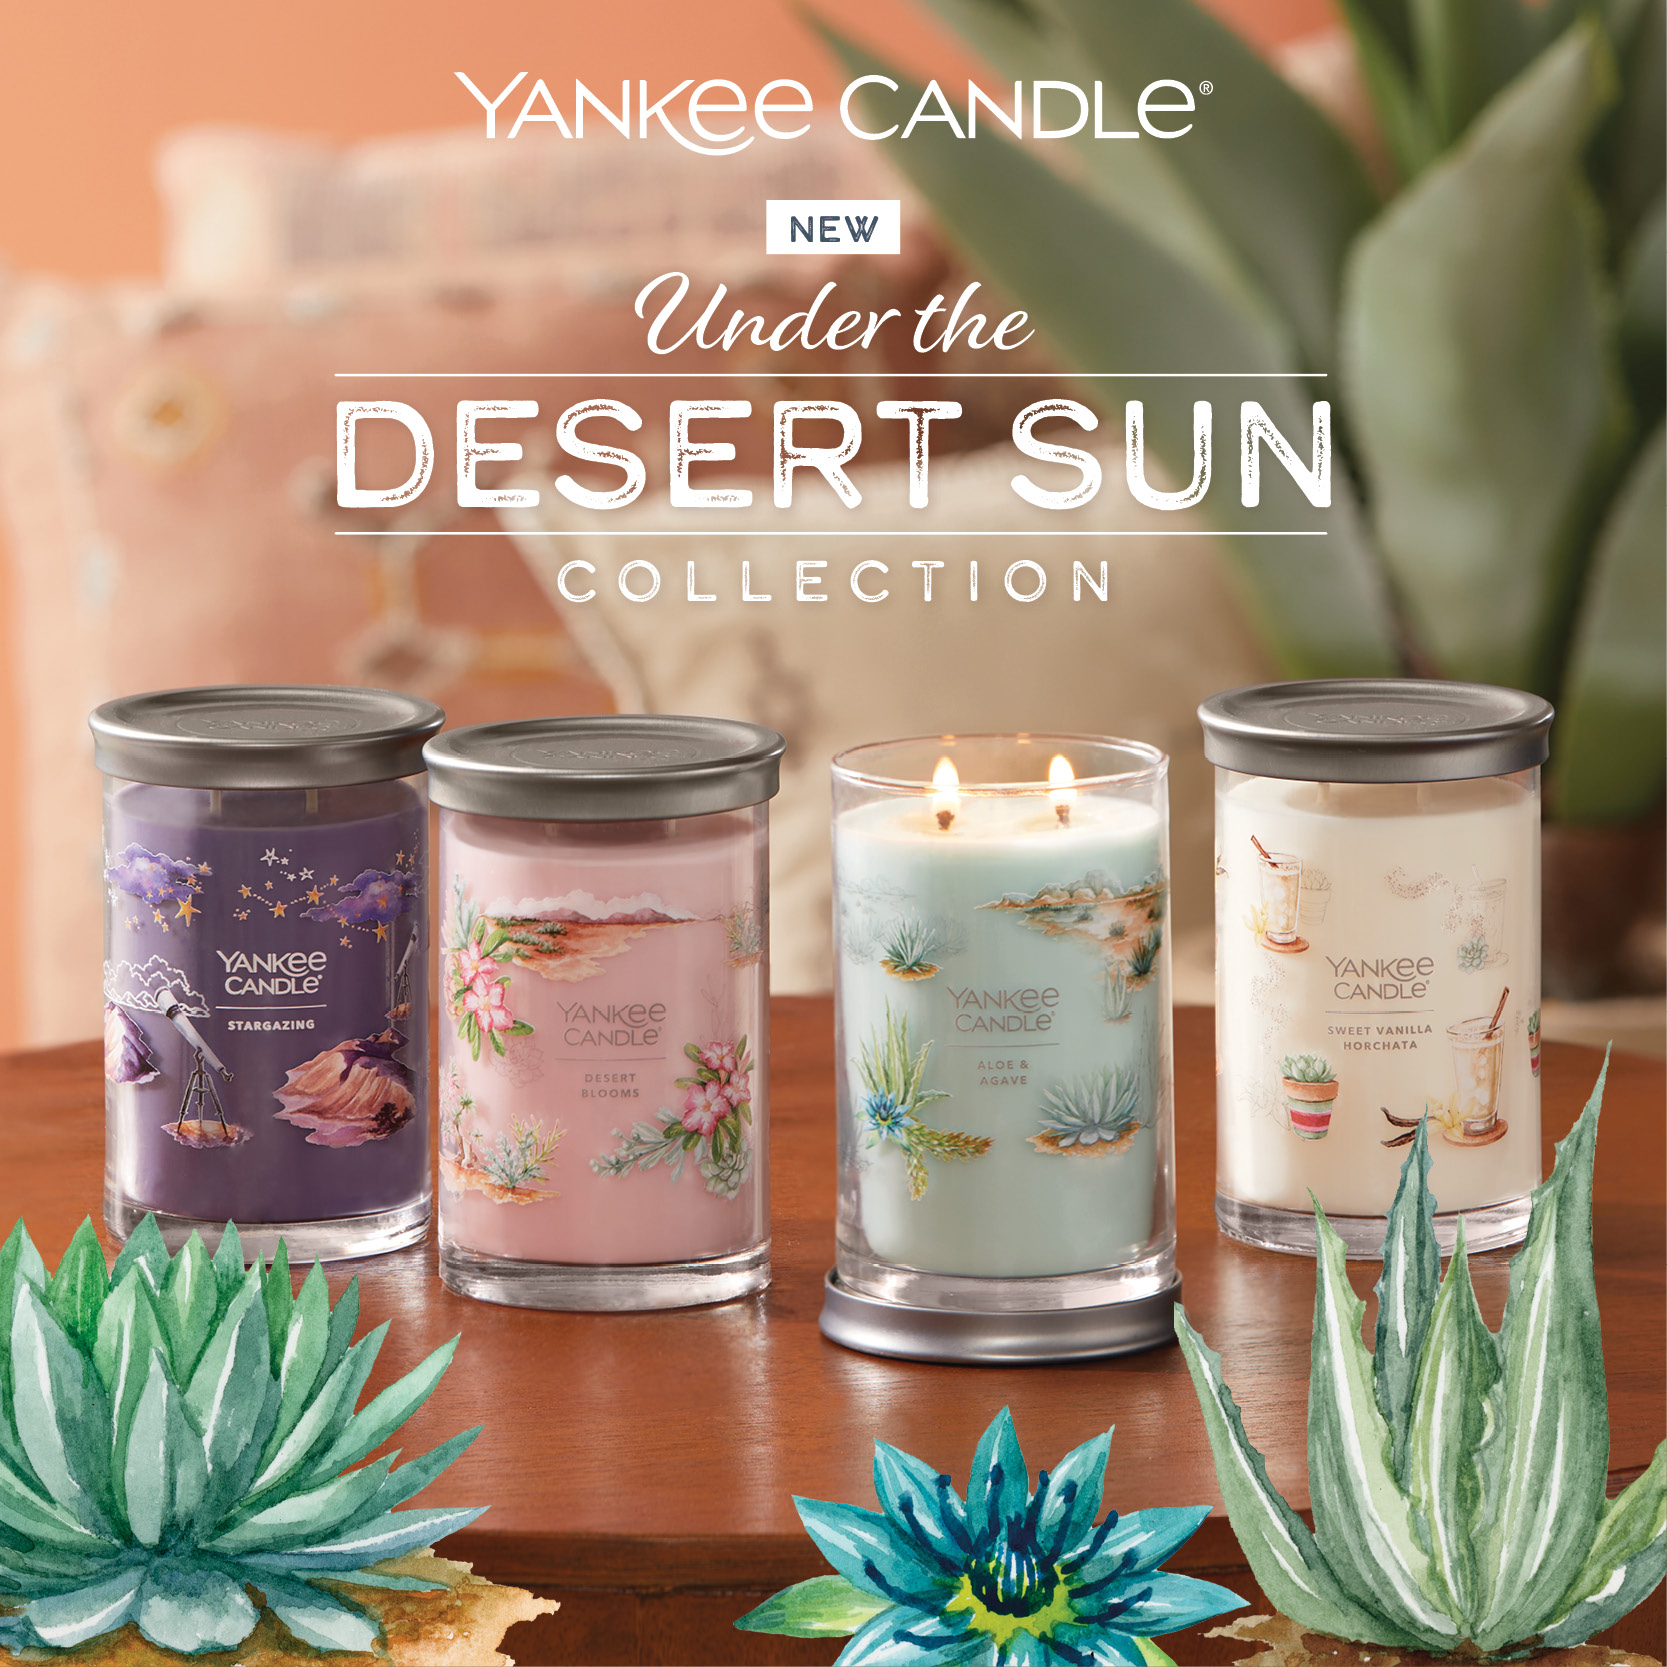 NEW Under the Desert Sun Collection from Yankee Candle